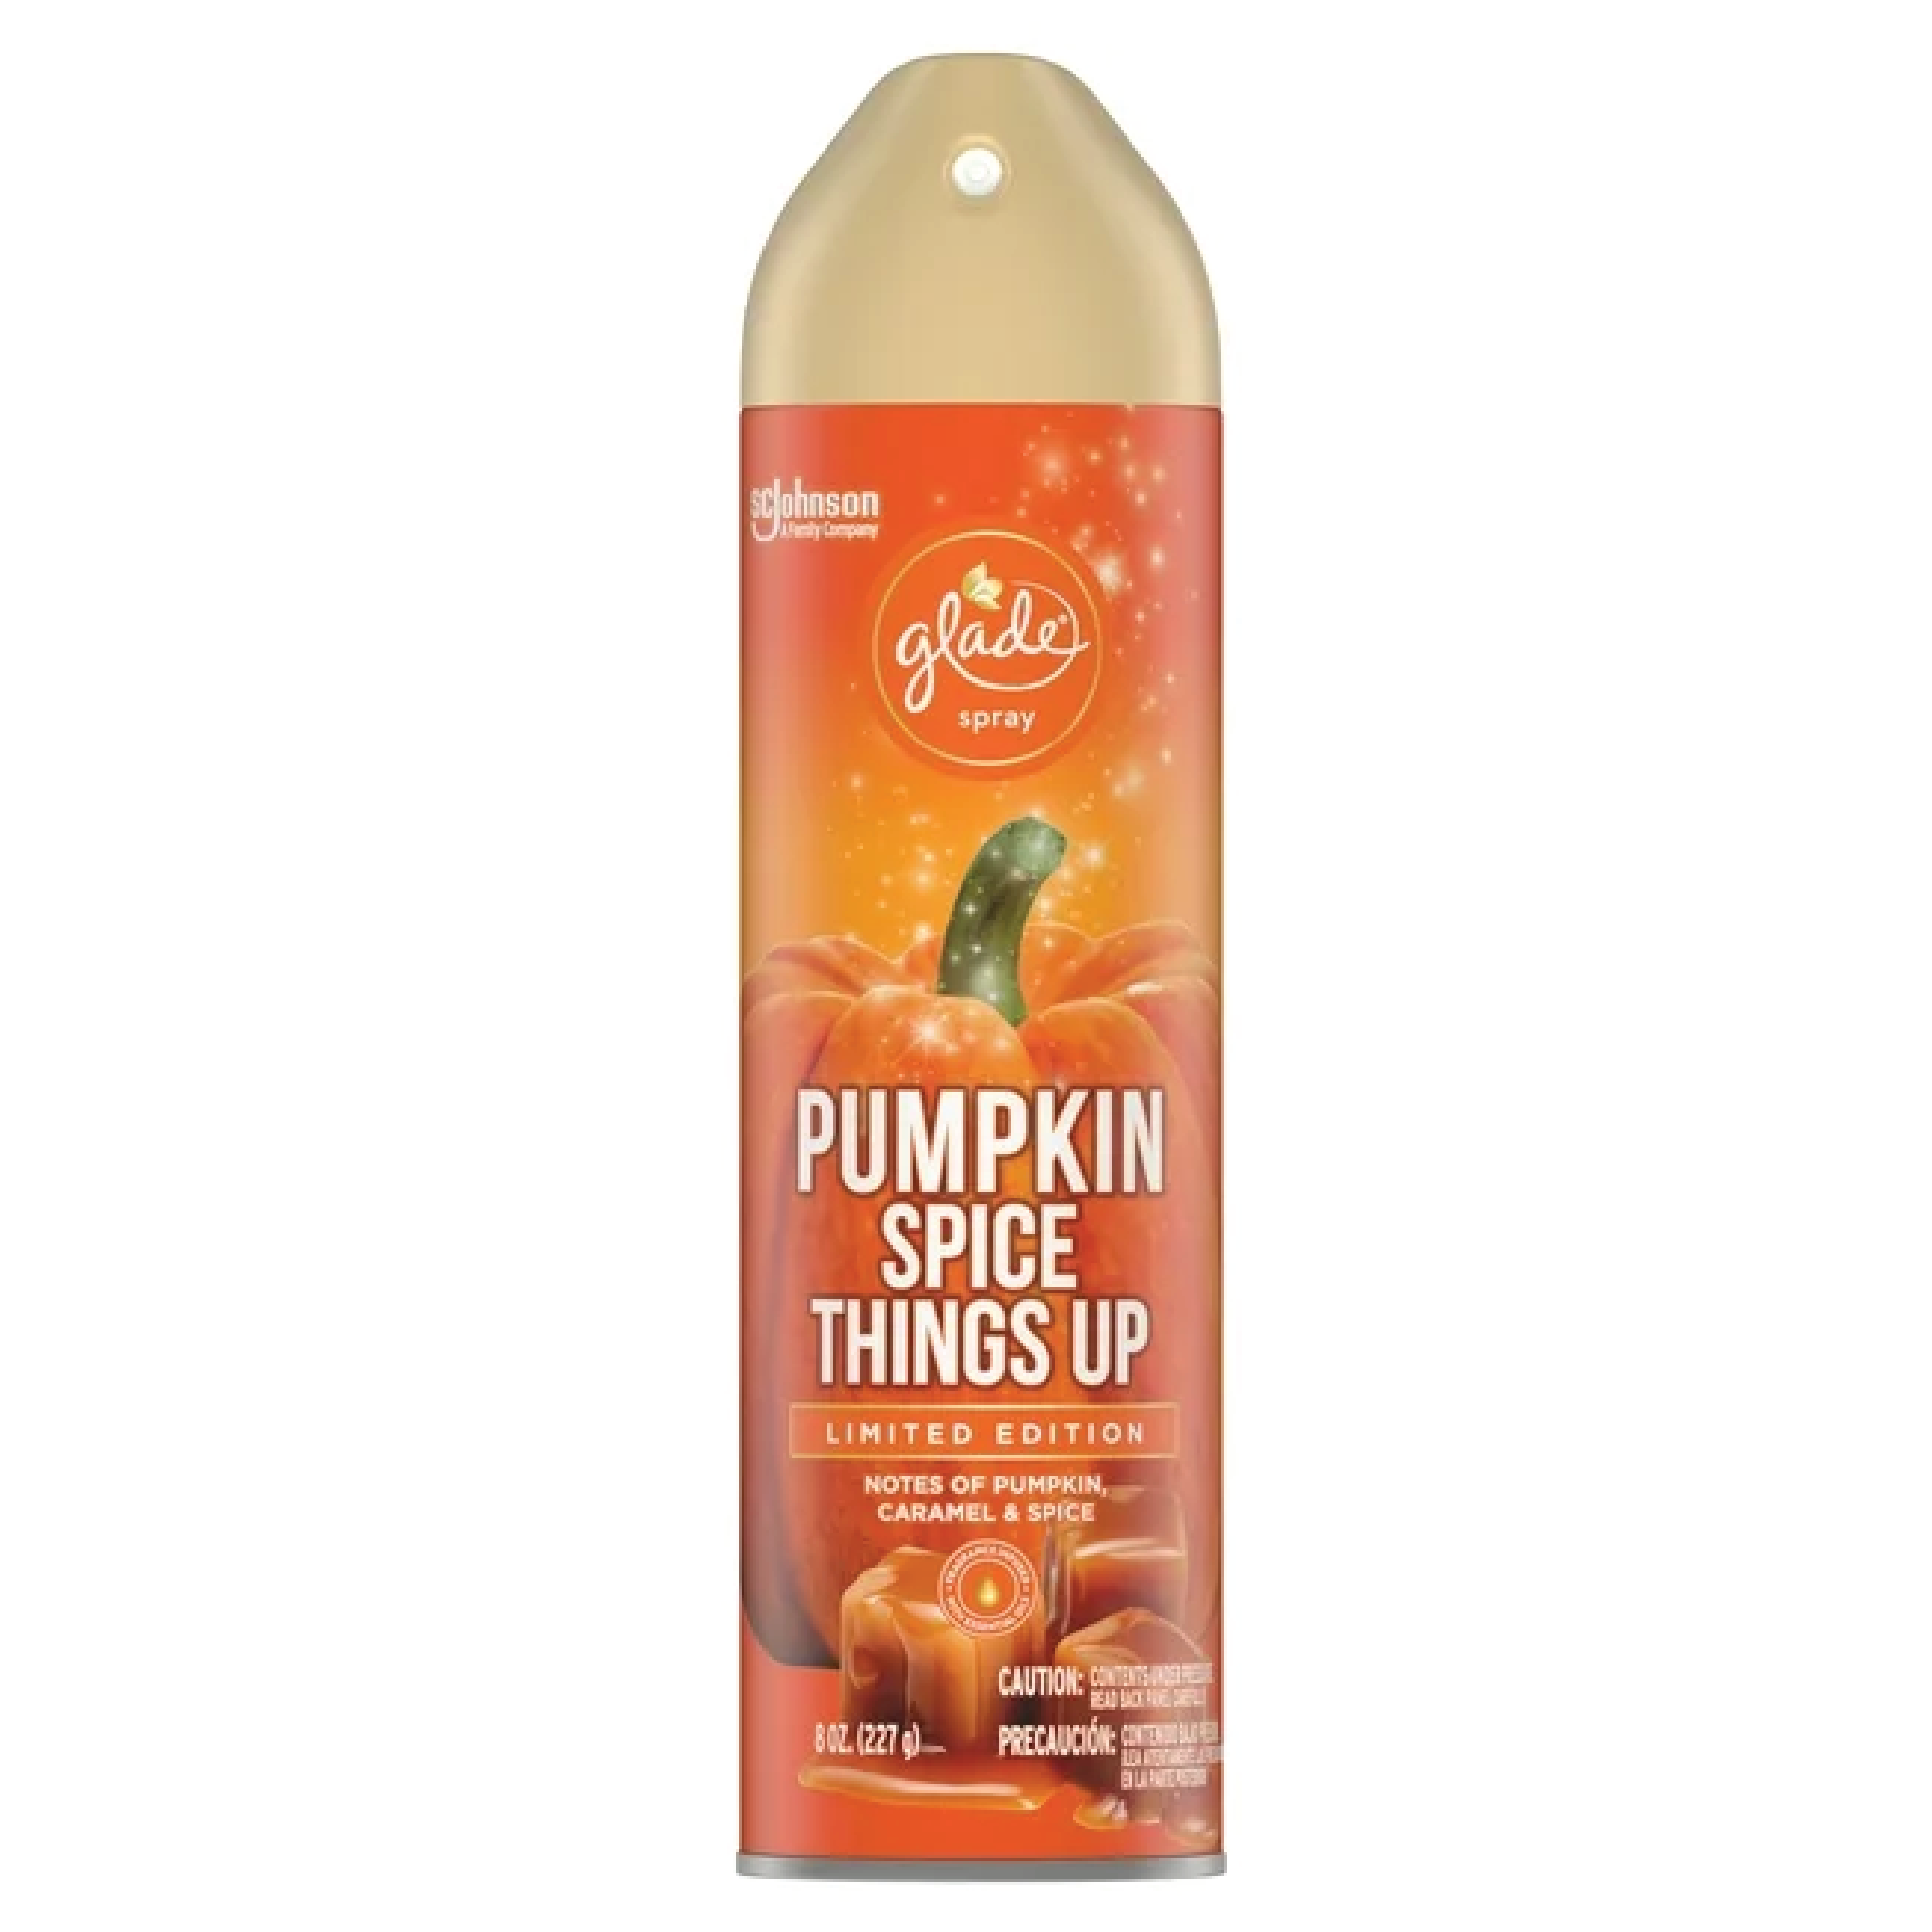 Glade Limited Edition Pumpkin Spice Things Up Air Freshener 8oz